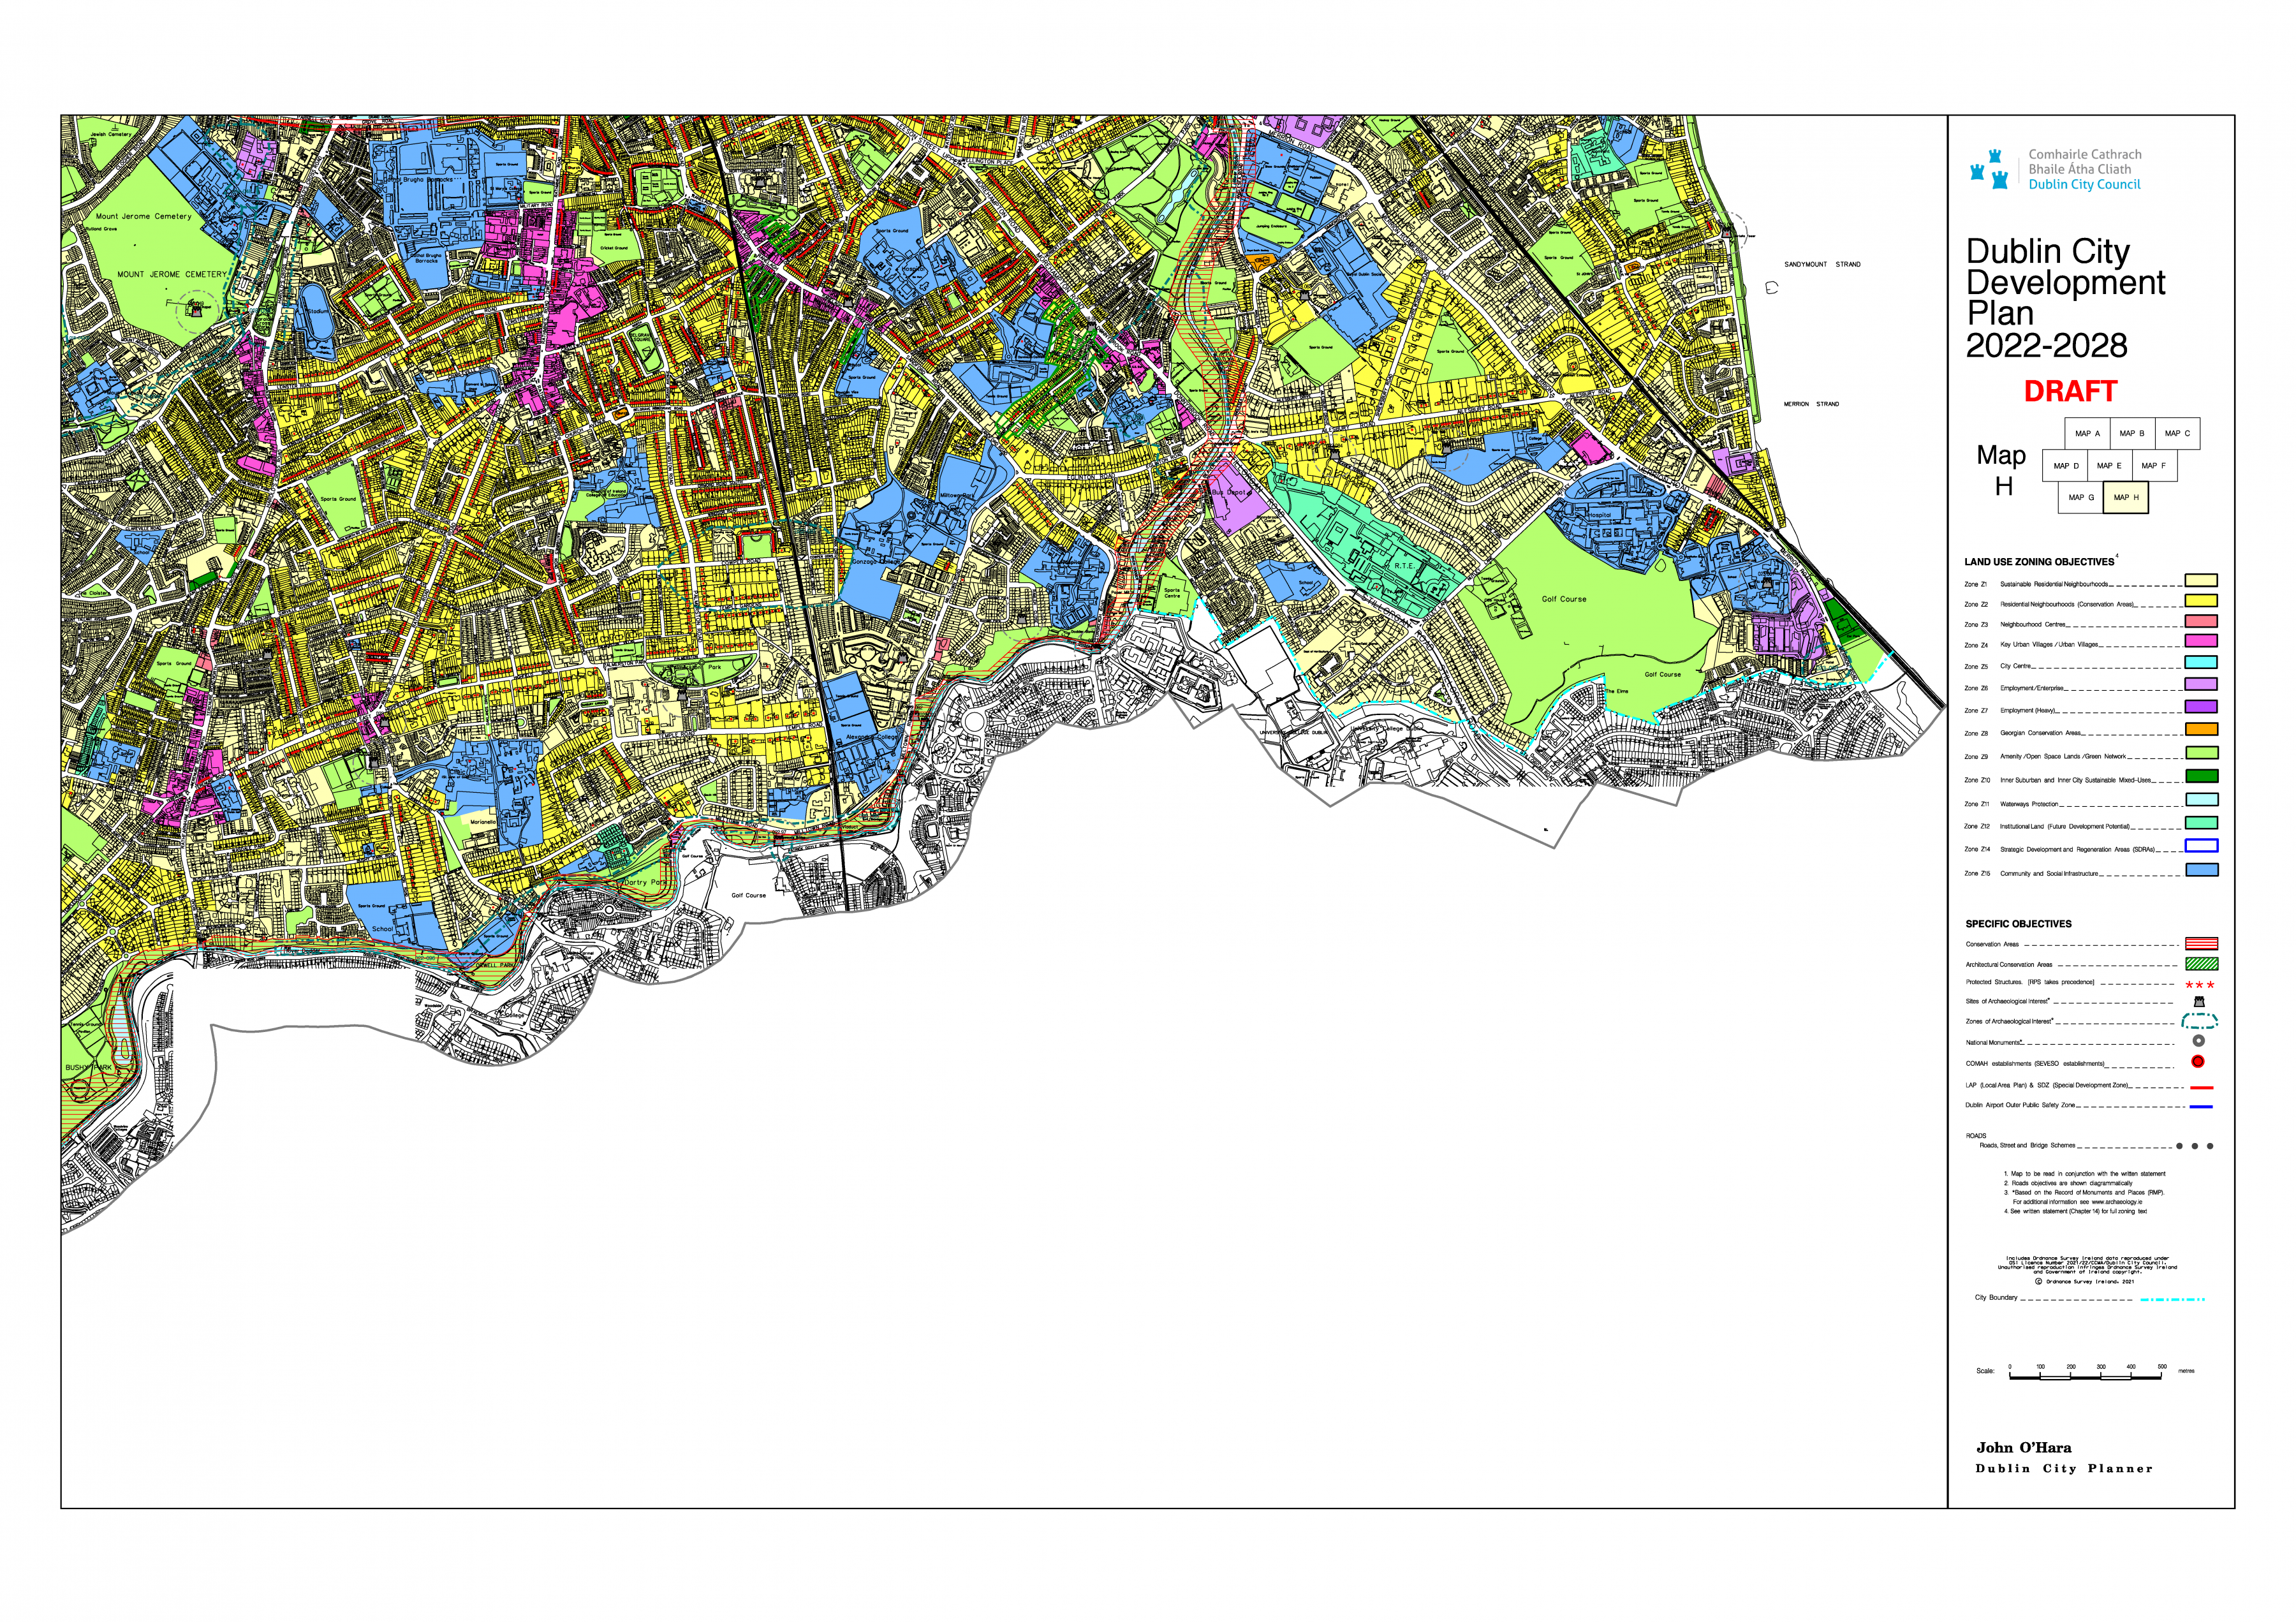 Map H Land Use Zoning Objectives